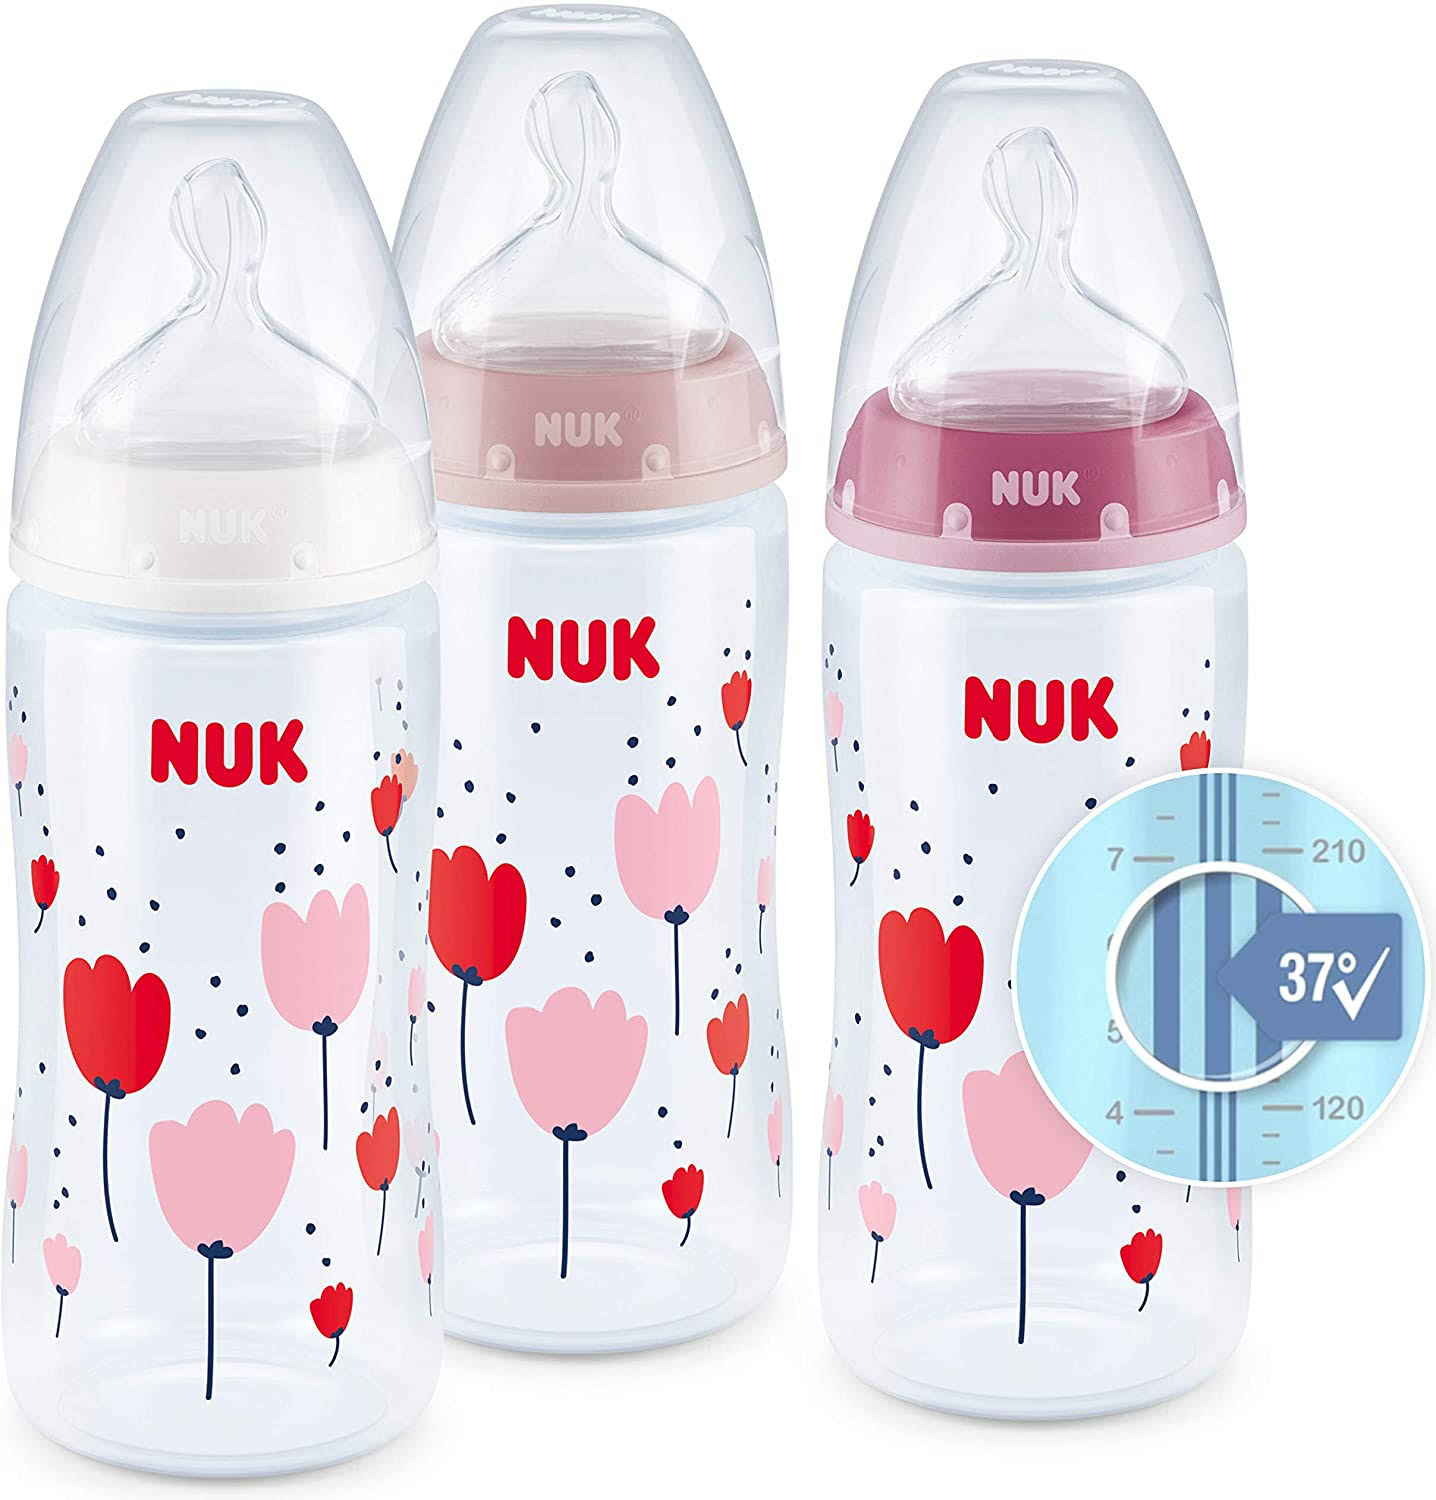 NUK First Choice Baby Bottle Teat 6-18 Months Silicone With Large Feed Hole 